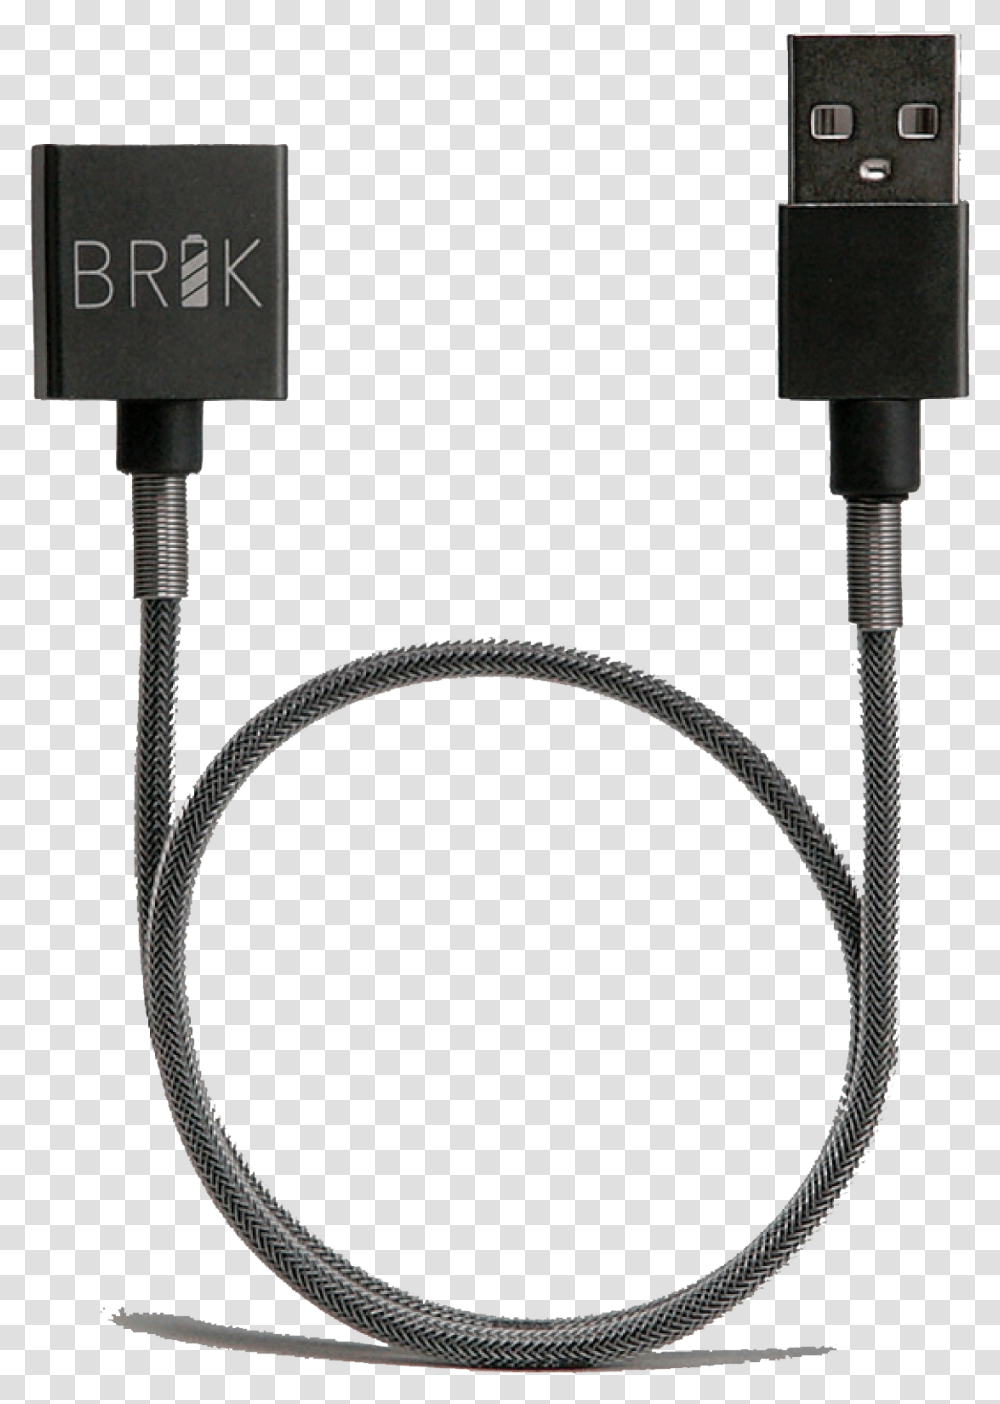 Juul Usb Cable Brik Charging Cables For Juul Vaporizer, Adapter, Plug Transparent Png